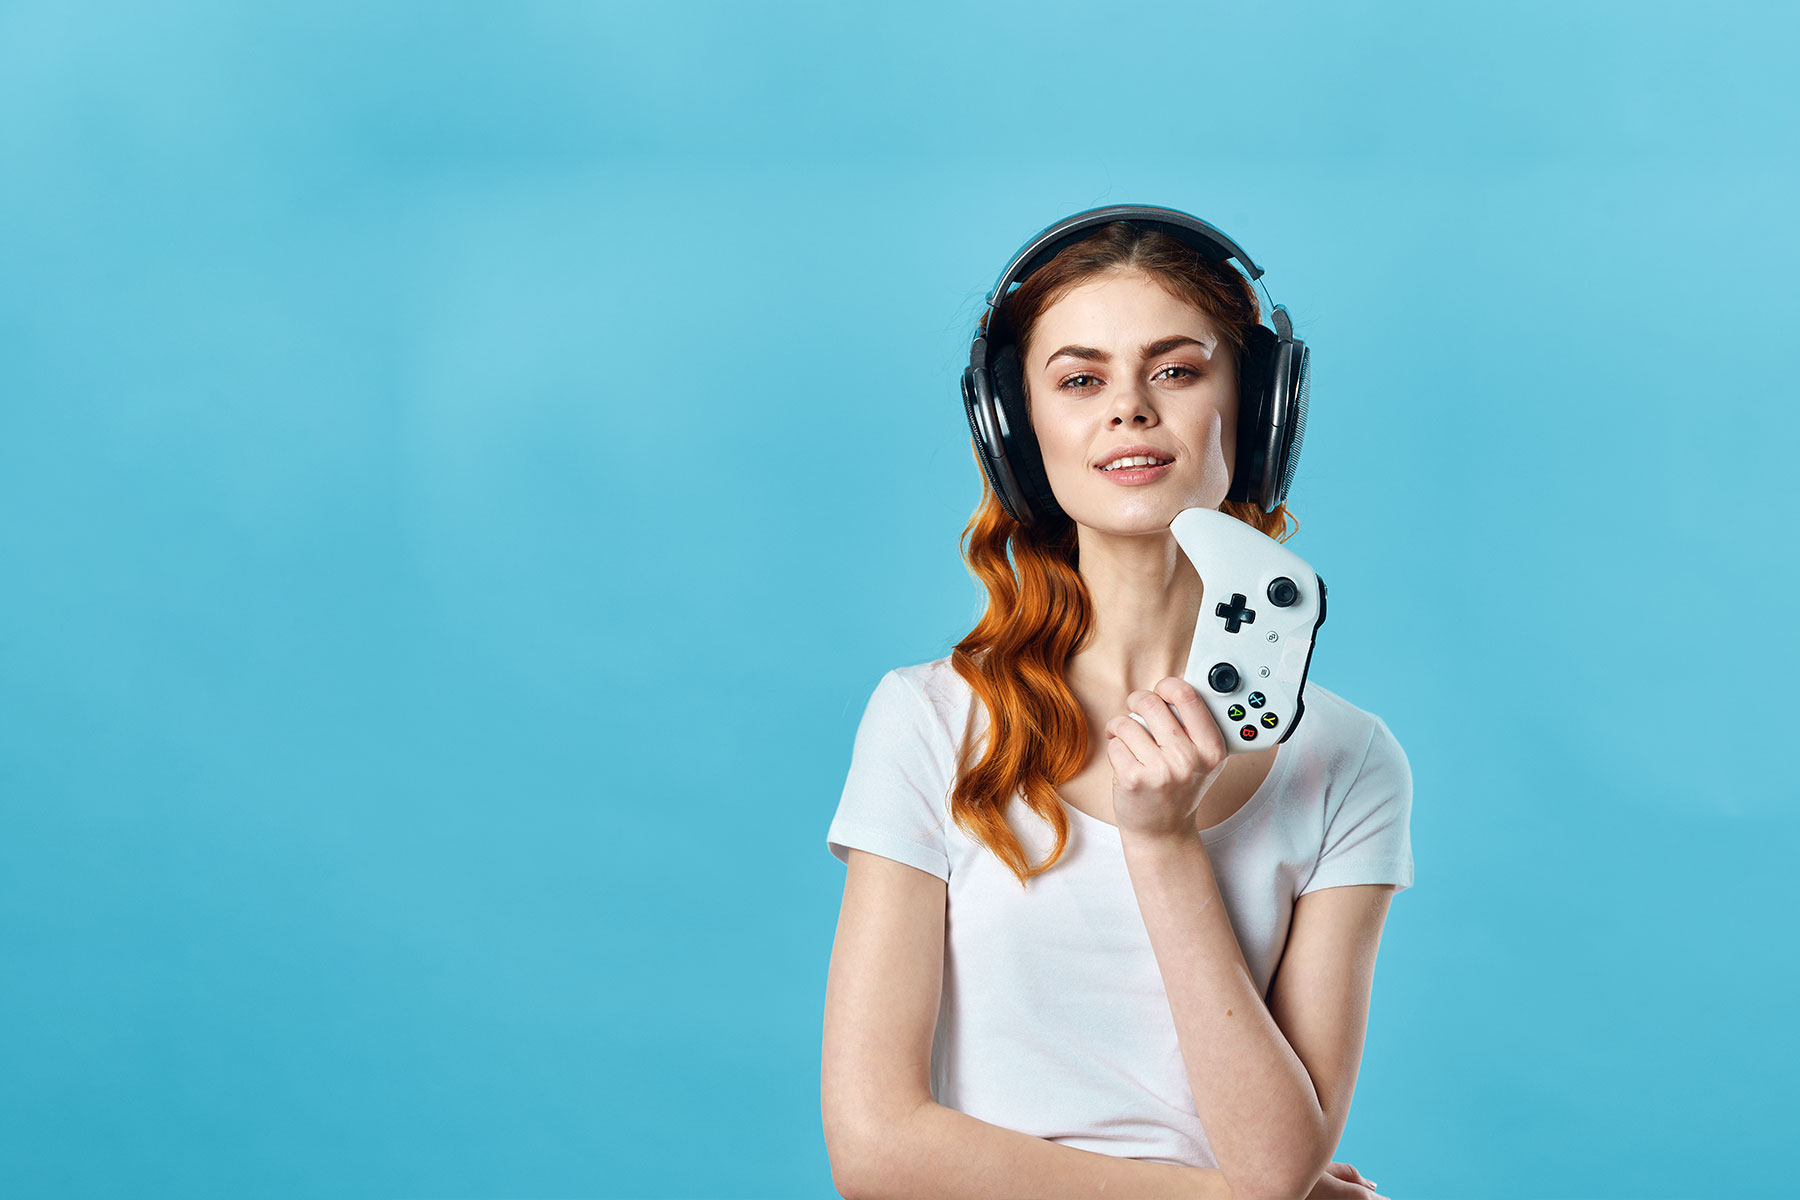 female gamer posing in front of a light blue background, wearing headphones and holding up a game controller